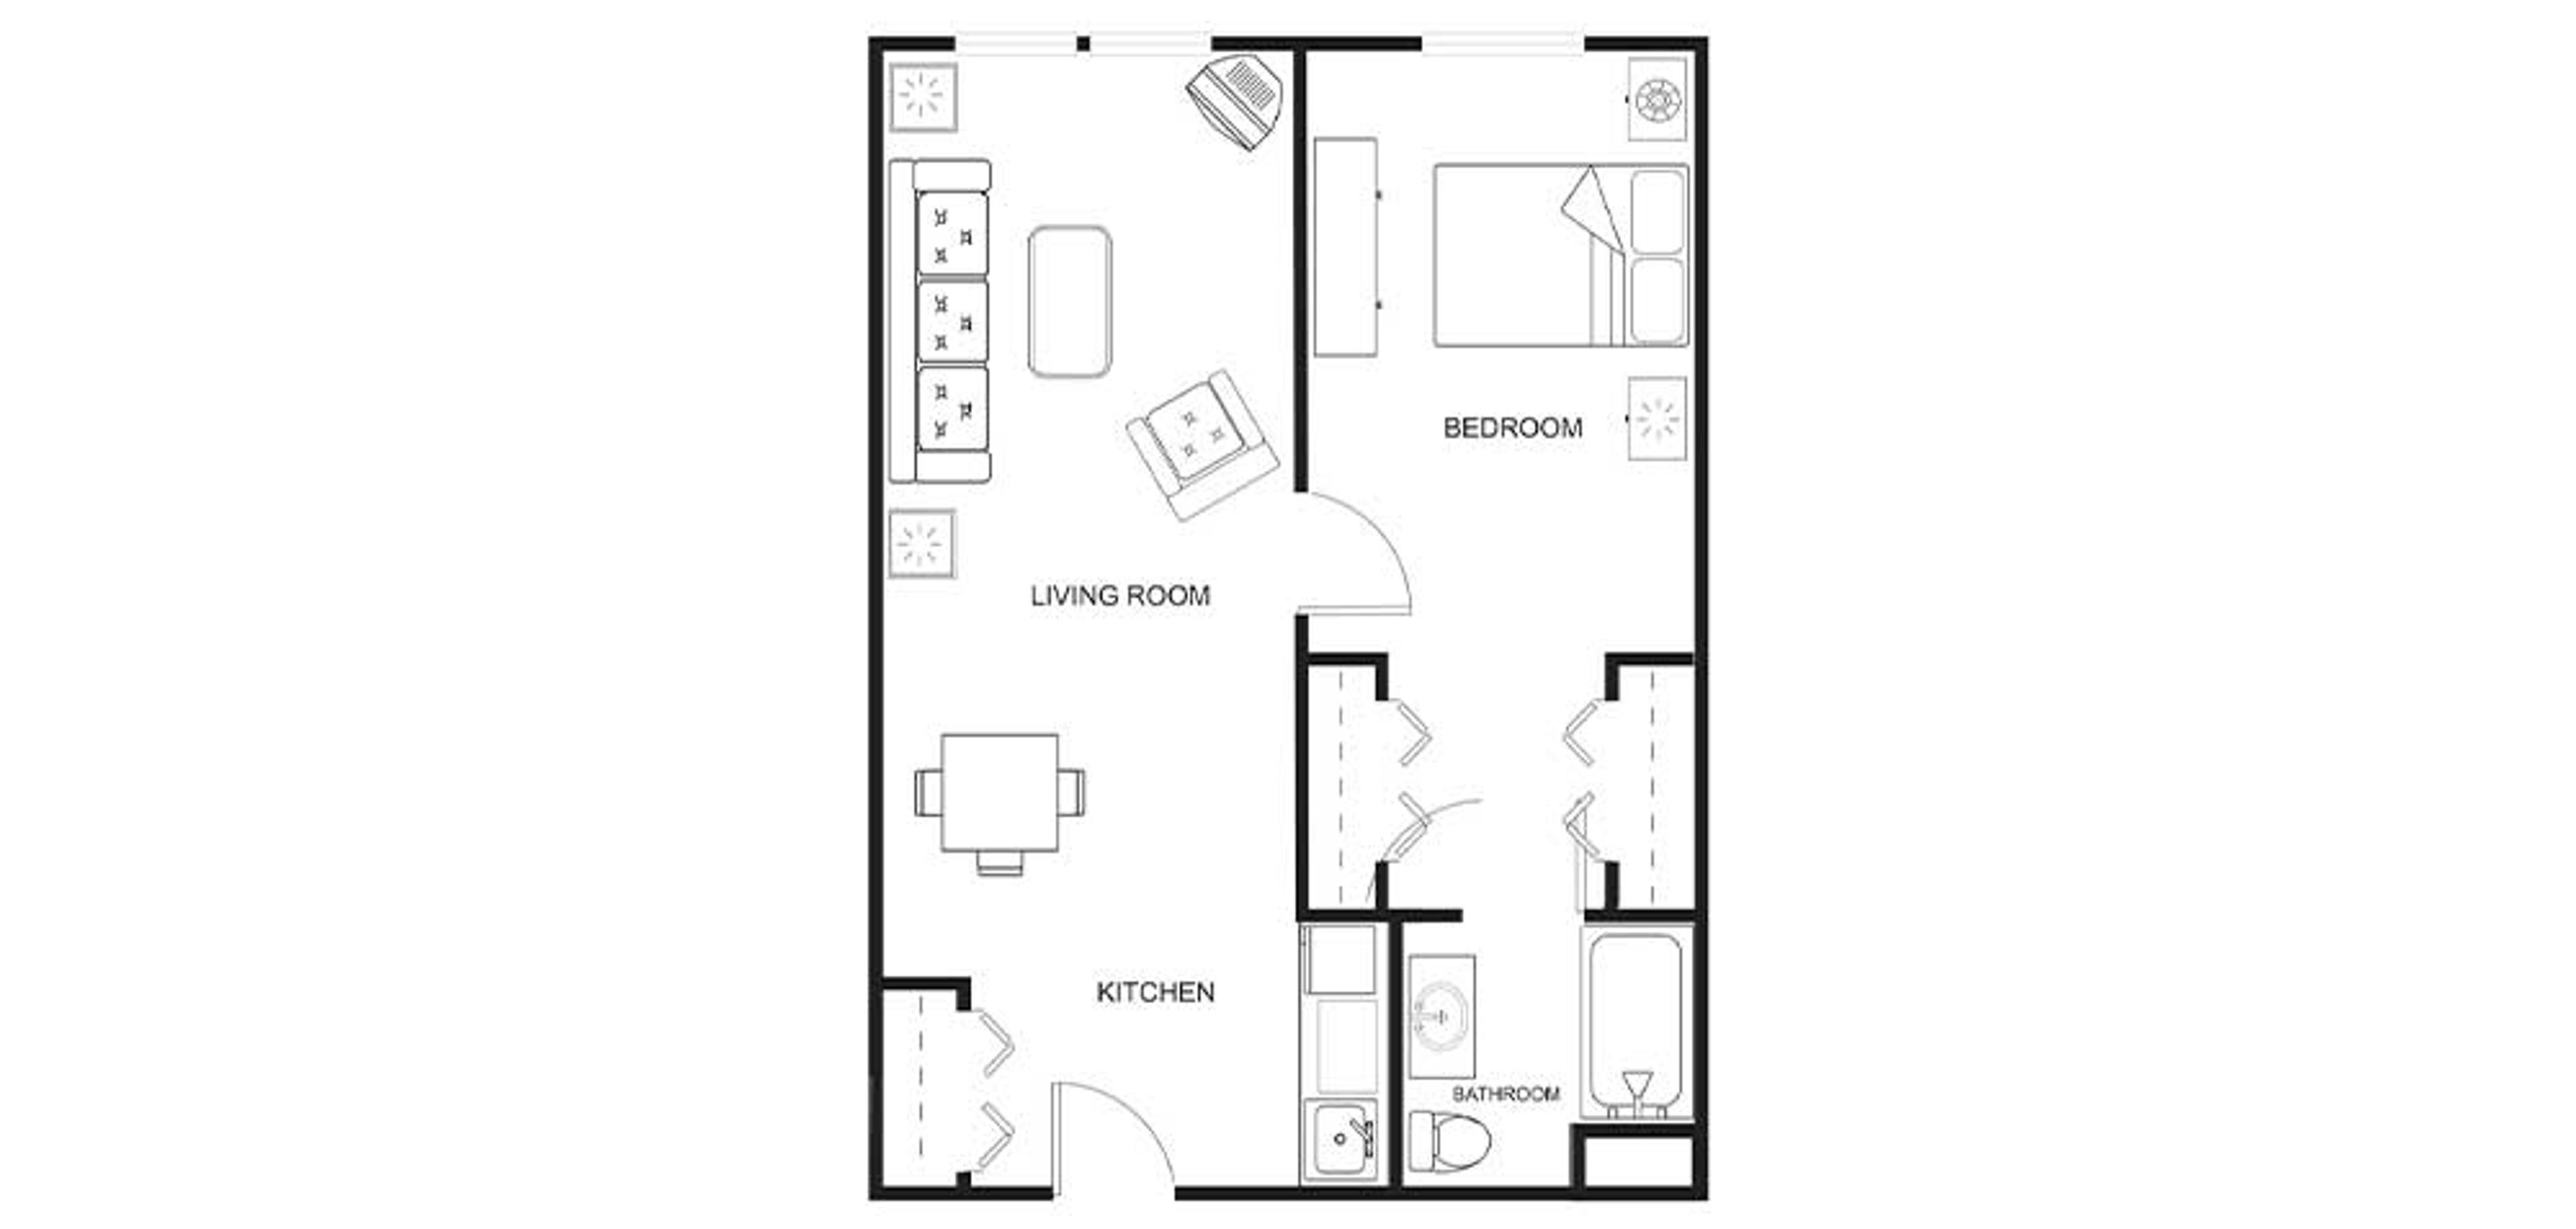 Floorplan - Pheasant Pointe - 1 bed, 1 bath, 575 - 600 sq. ft. Assisted Living